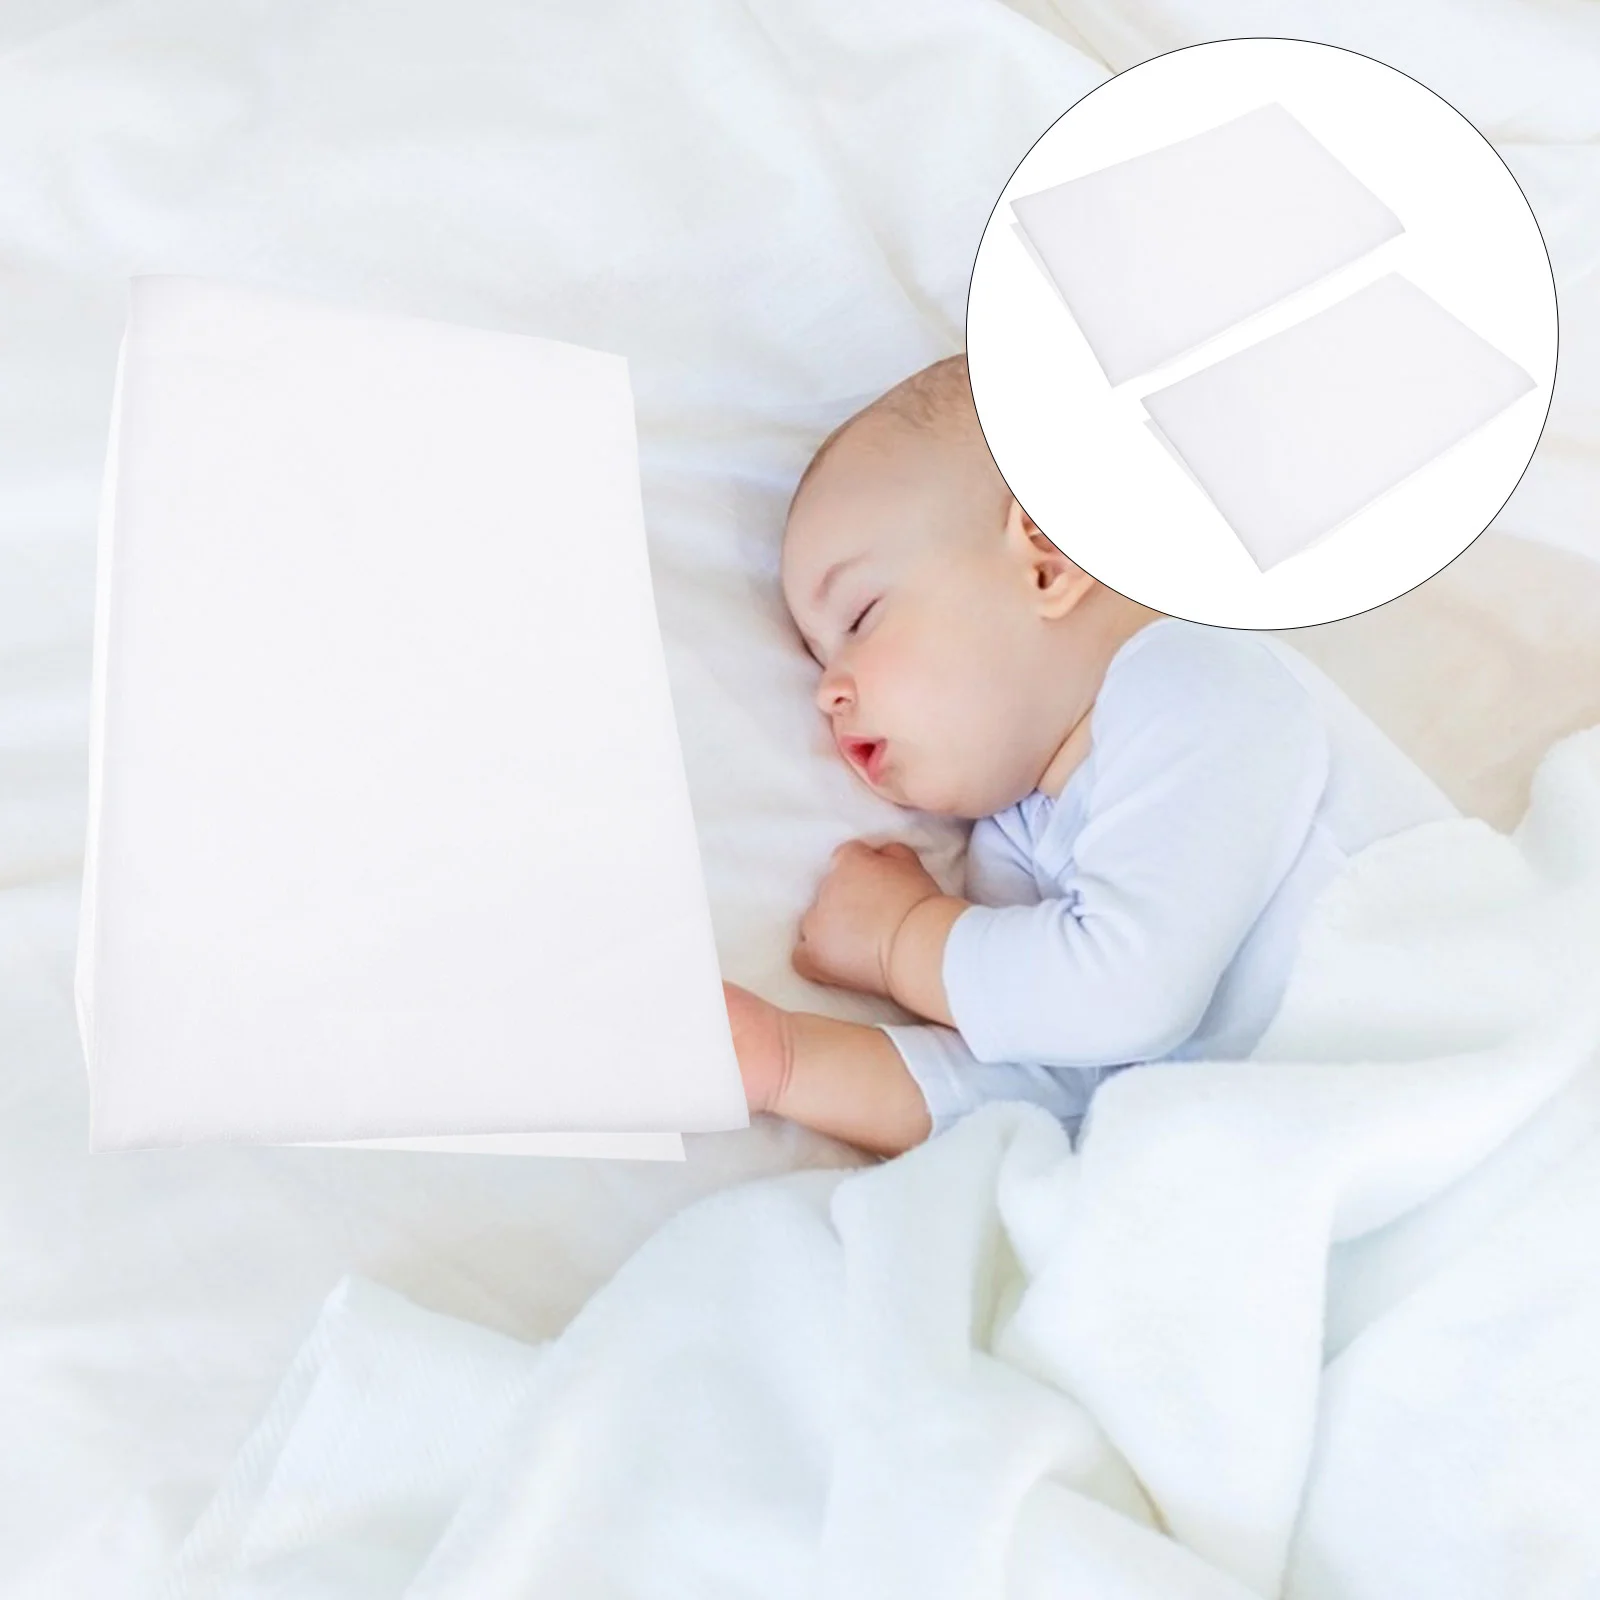 200pcs Disposable Baby Bed Mats Diaper Pads Nappy Changing Mats (White)